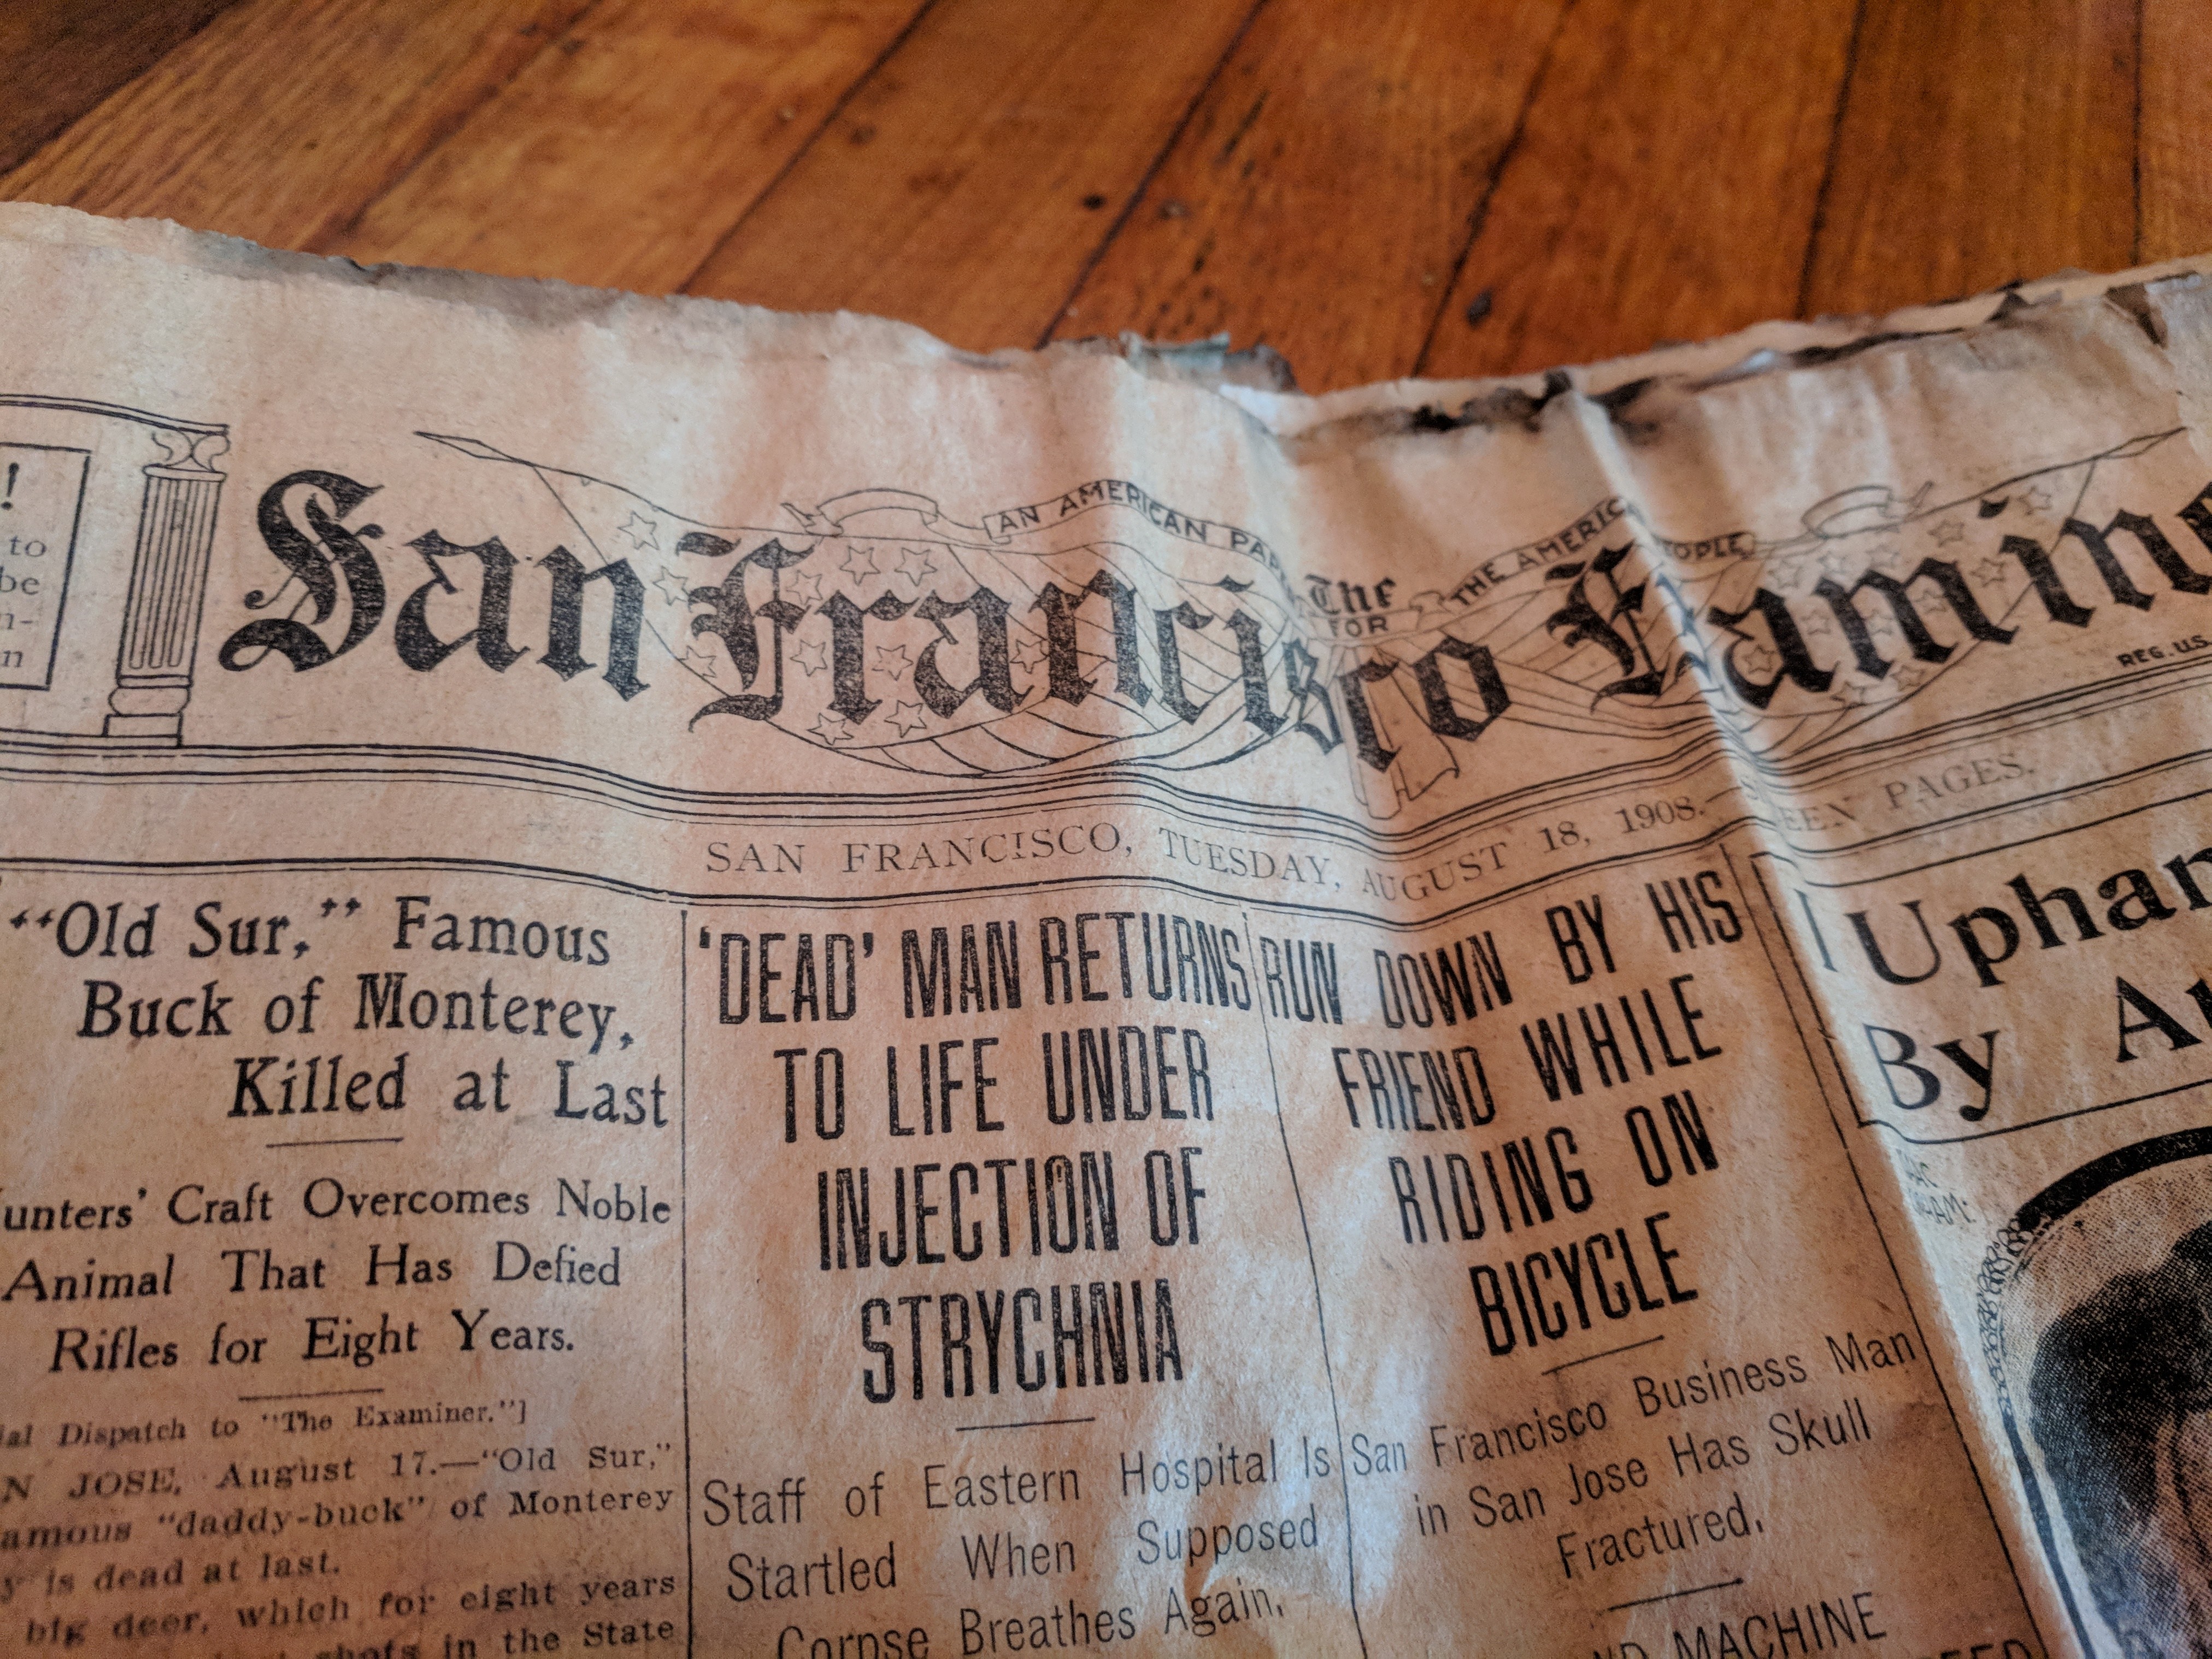 Cole Valley Flat For $15;  Scantily Clad Bathers Arrested; Dead Man Returns To Life – August 18, 1908